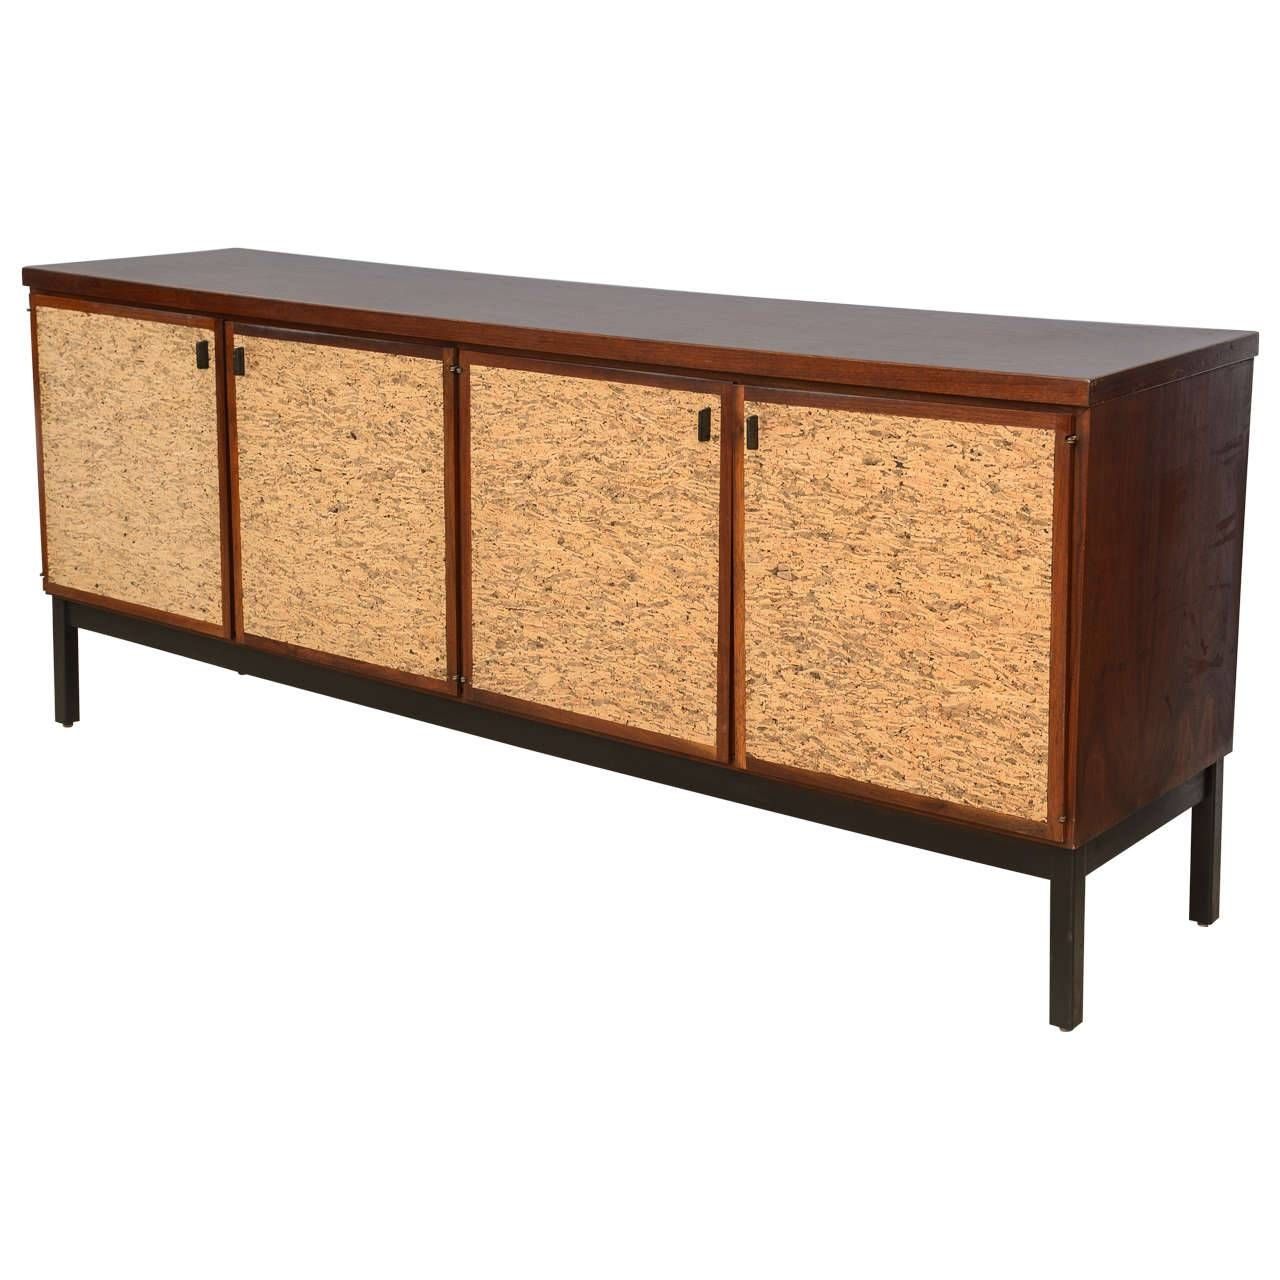 Sideboards. Marvellous Credenza Buffet: Credenza Buffet Ashley Inside Marble Top Sideboards And Buffets (Photo 5 of 15)